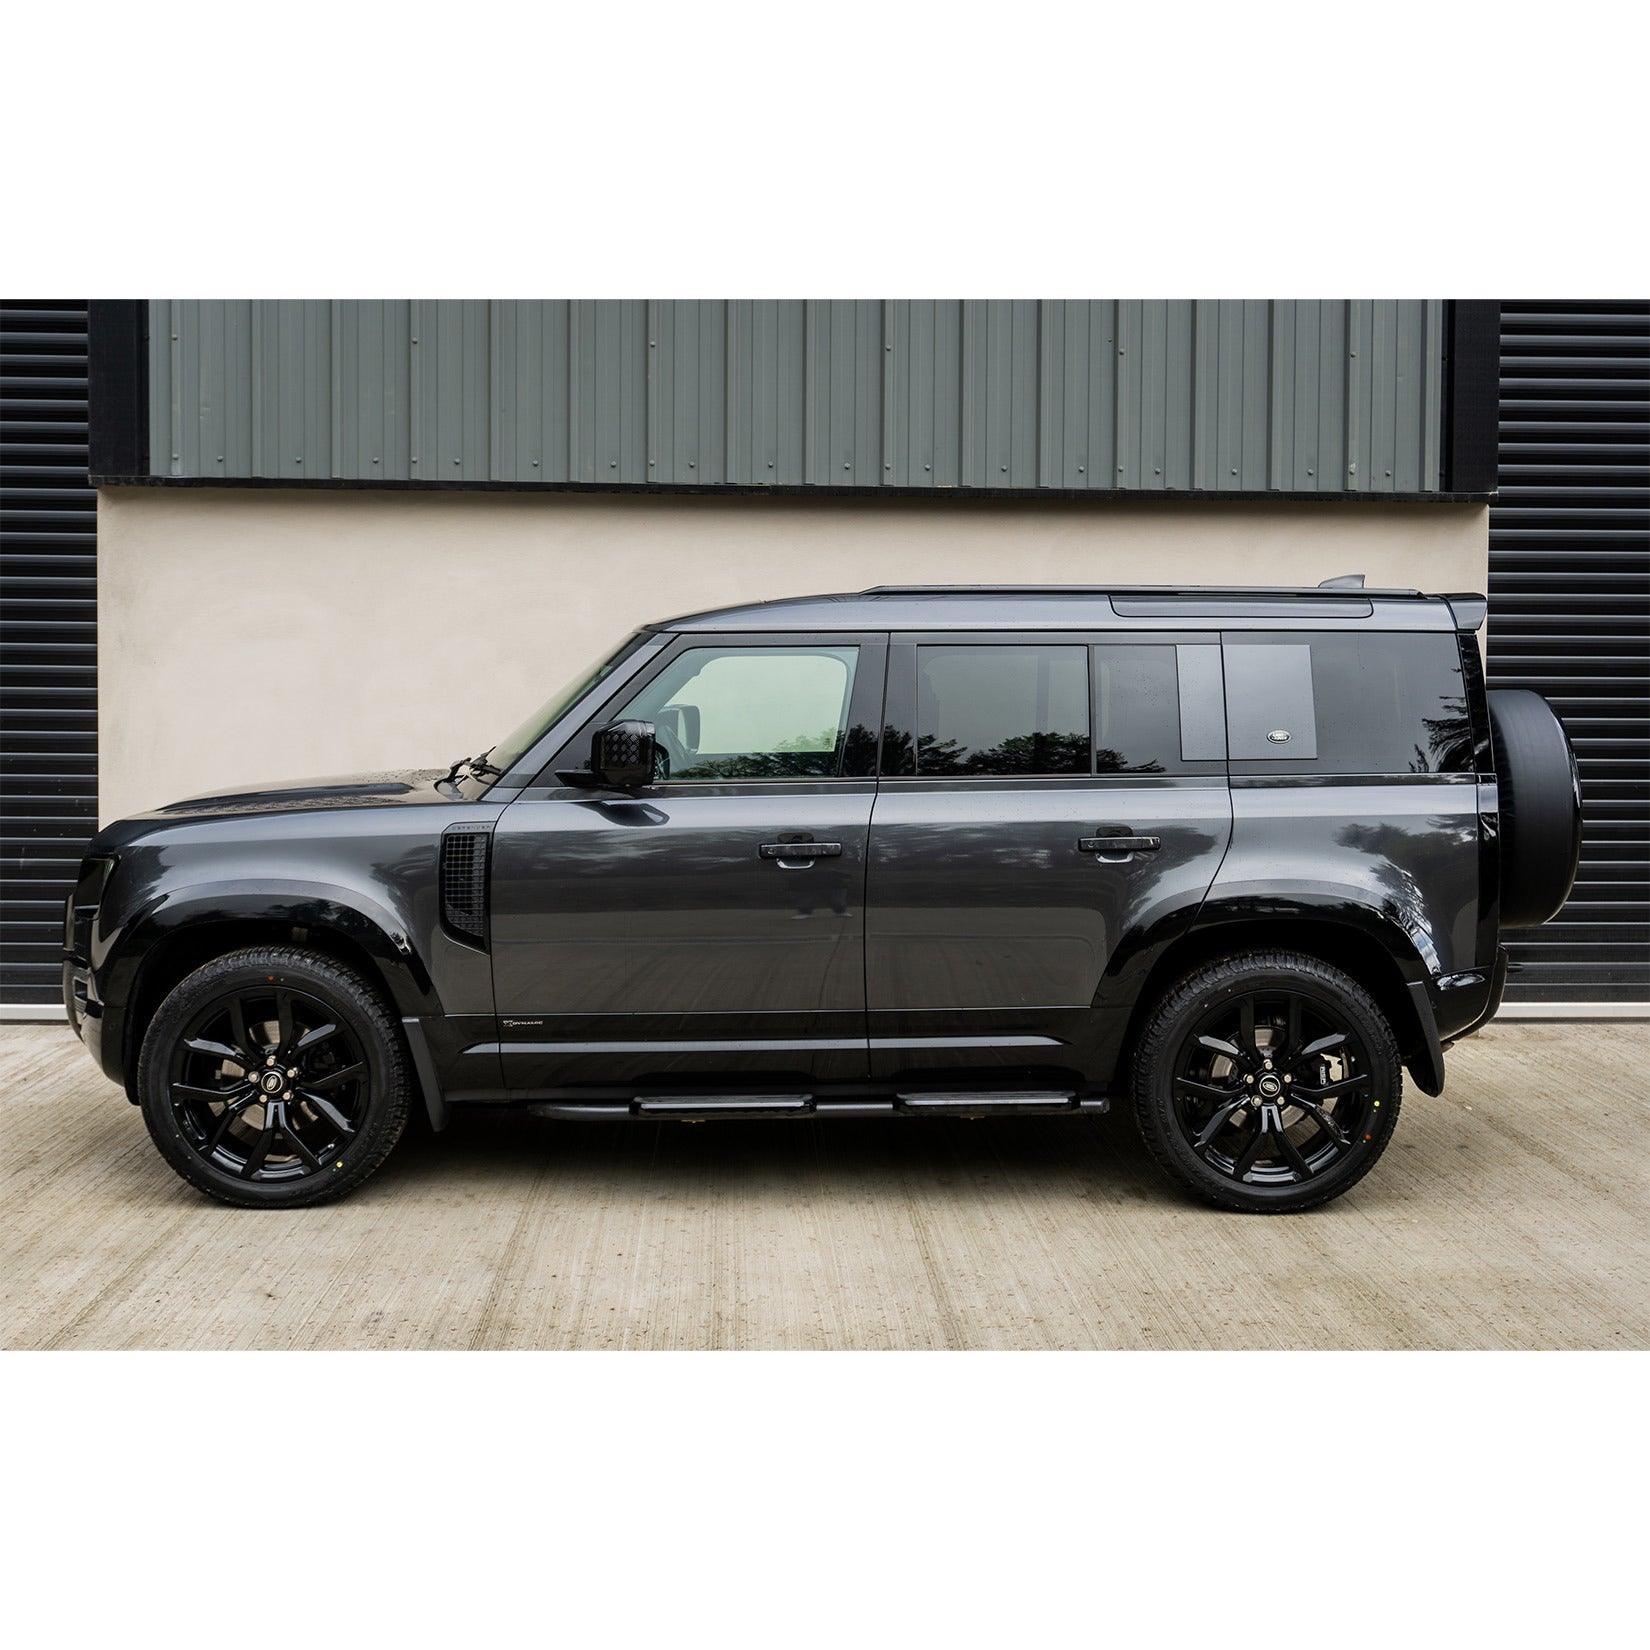 LAND ROVER DEFENDER 110 L663 2020 ON OE STYLE SIDE STEPS - PAIR - IN BLACK (NO LOGO) - Storm Xccessories2